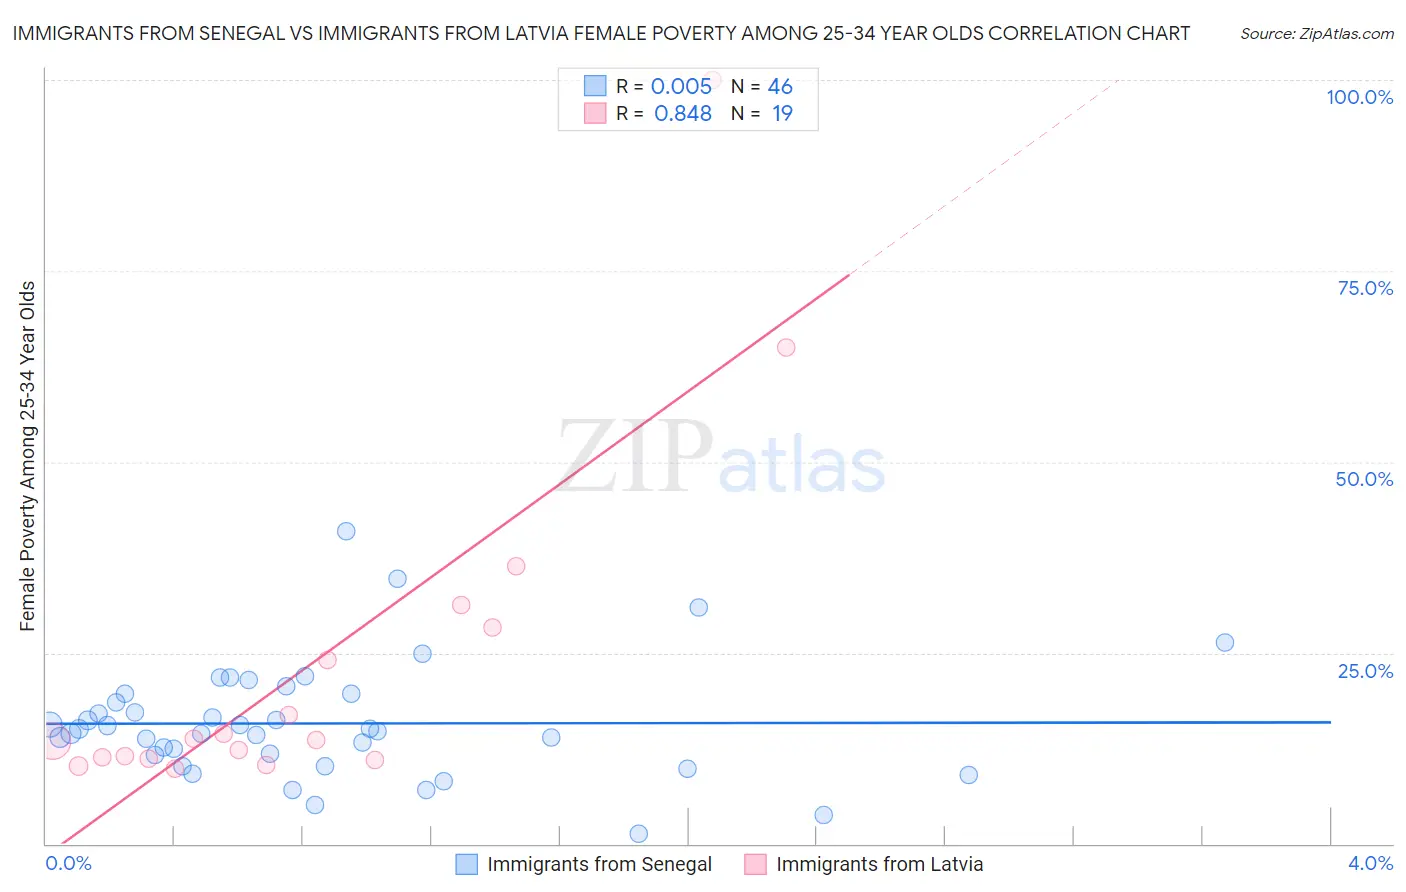 Immigrants from Senegal vs Immigrants from Latvia Female Poverty Among 25-34 Year Olds